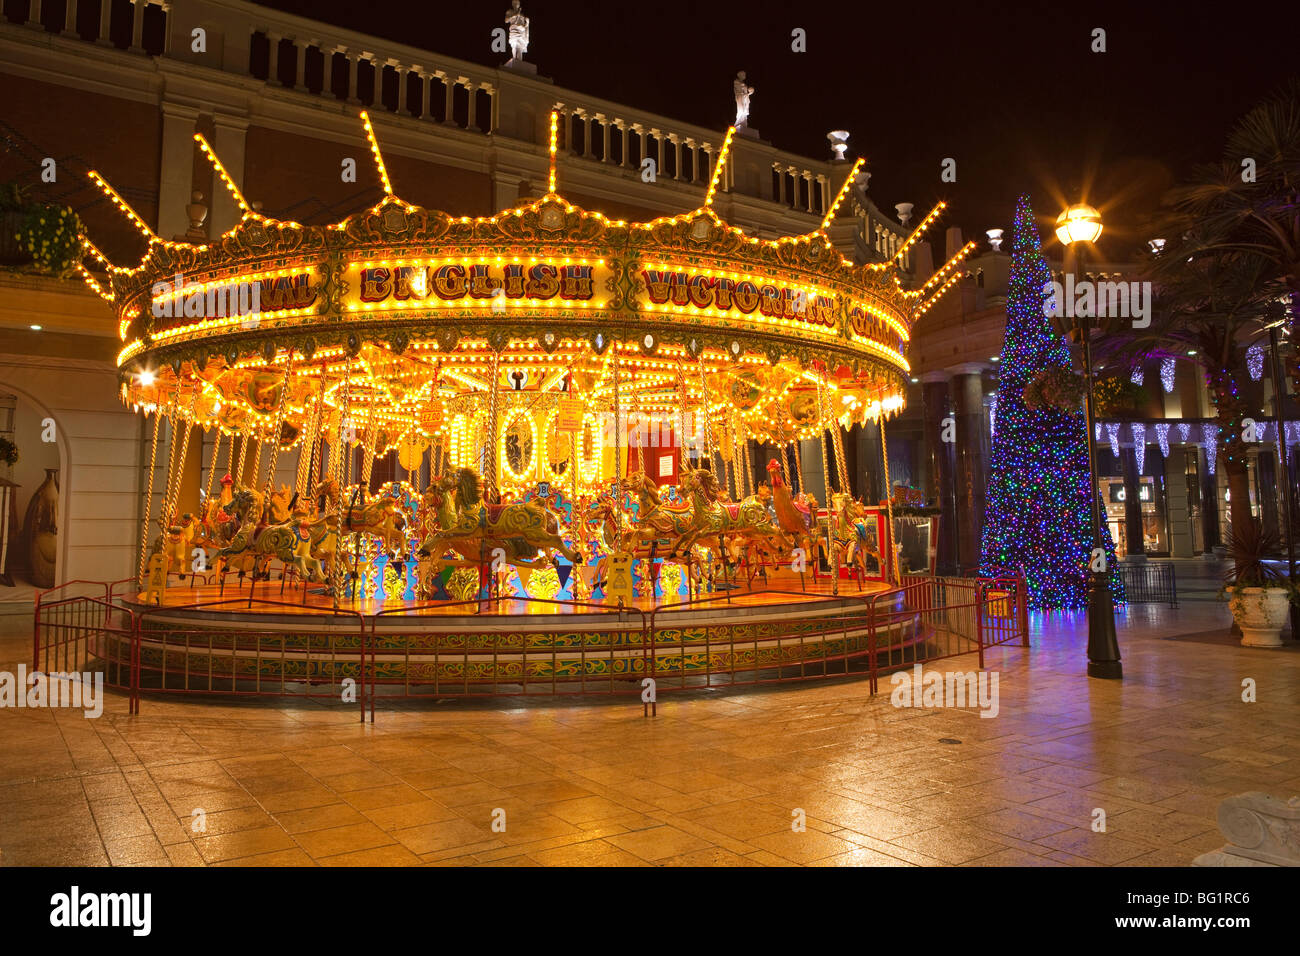 Royaume-uni, Angleterre, Manchester, Trafford Centre Shopping Mall, Barton Square, carrousel traditionnel Banque D'Images